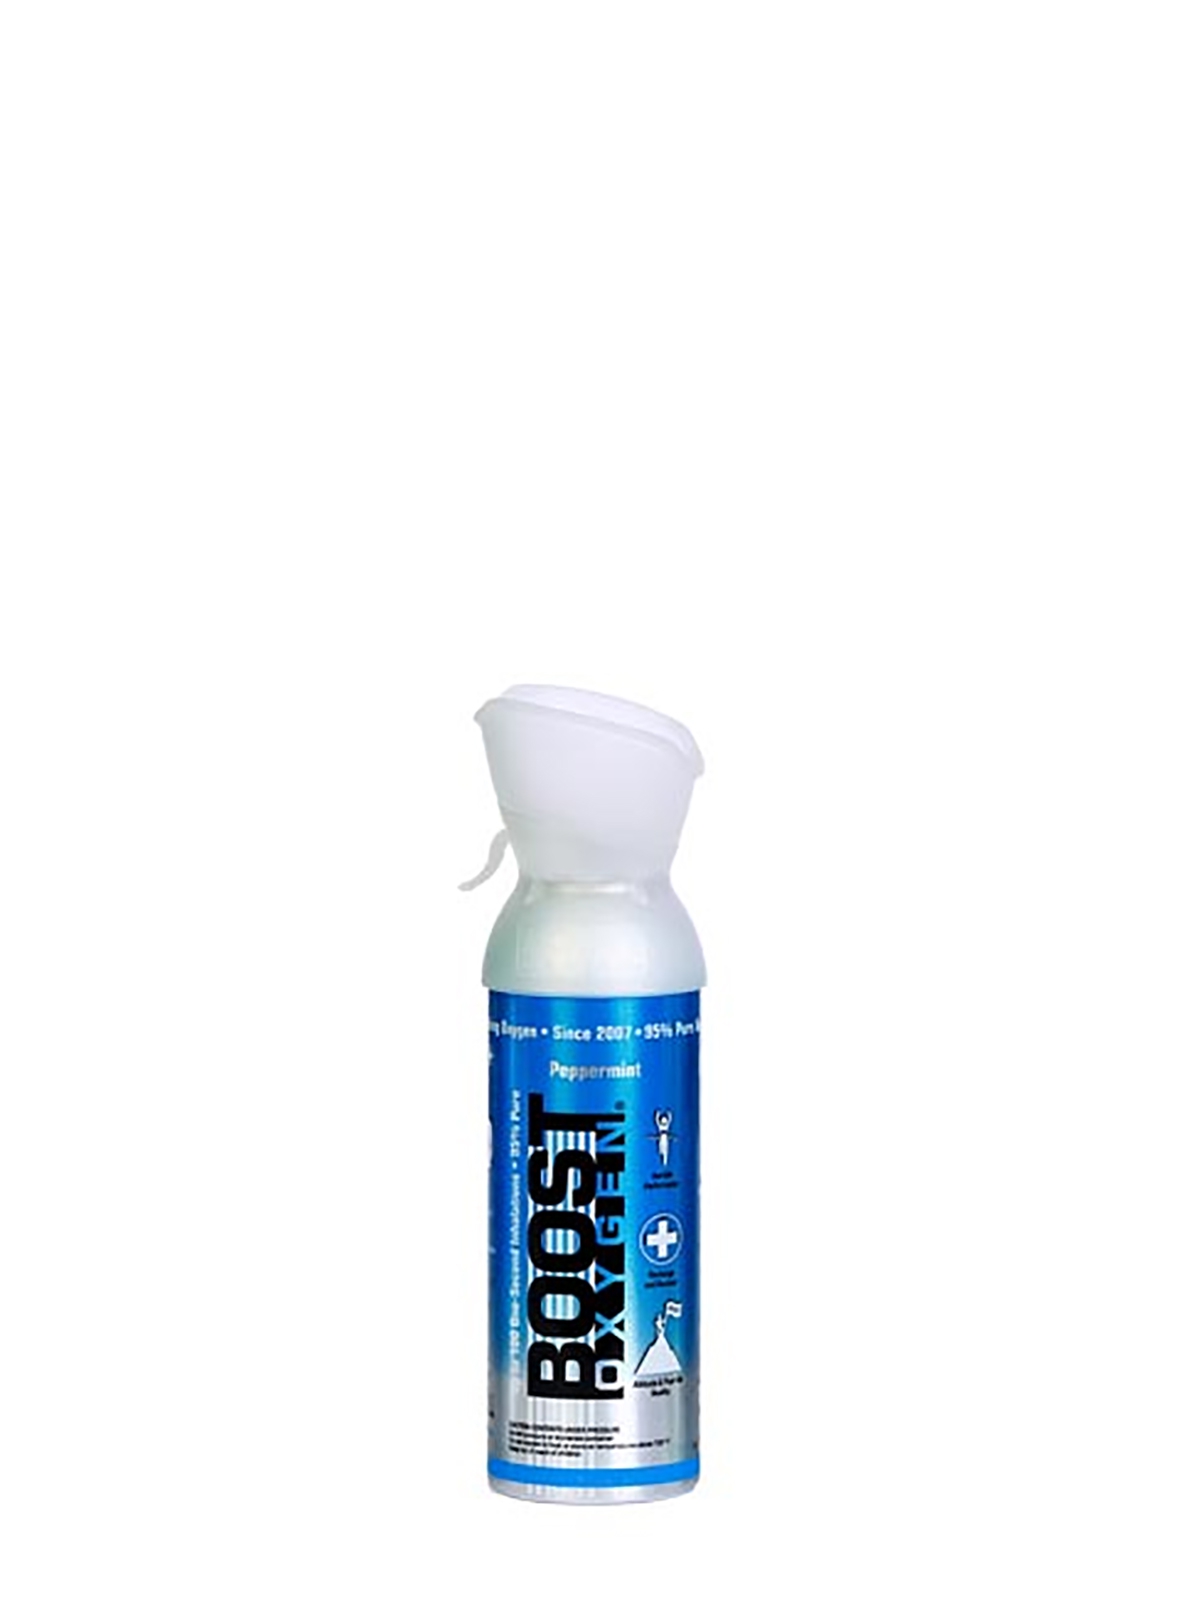 Boost Oxygen Peppermint - 95% pure oxygen with taste, 3 liters can